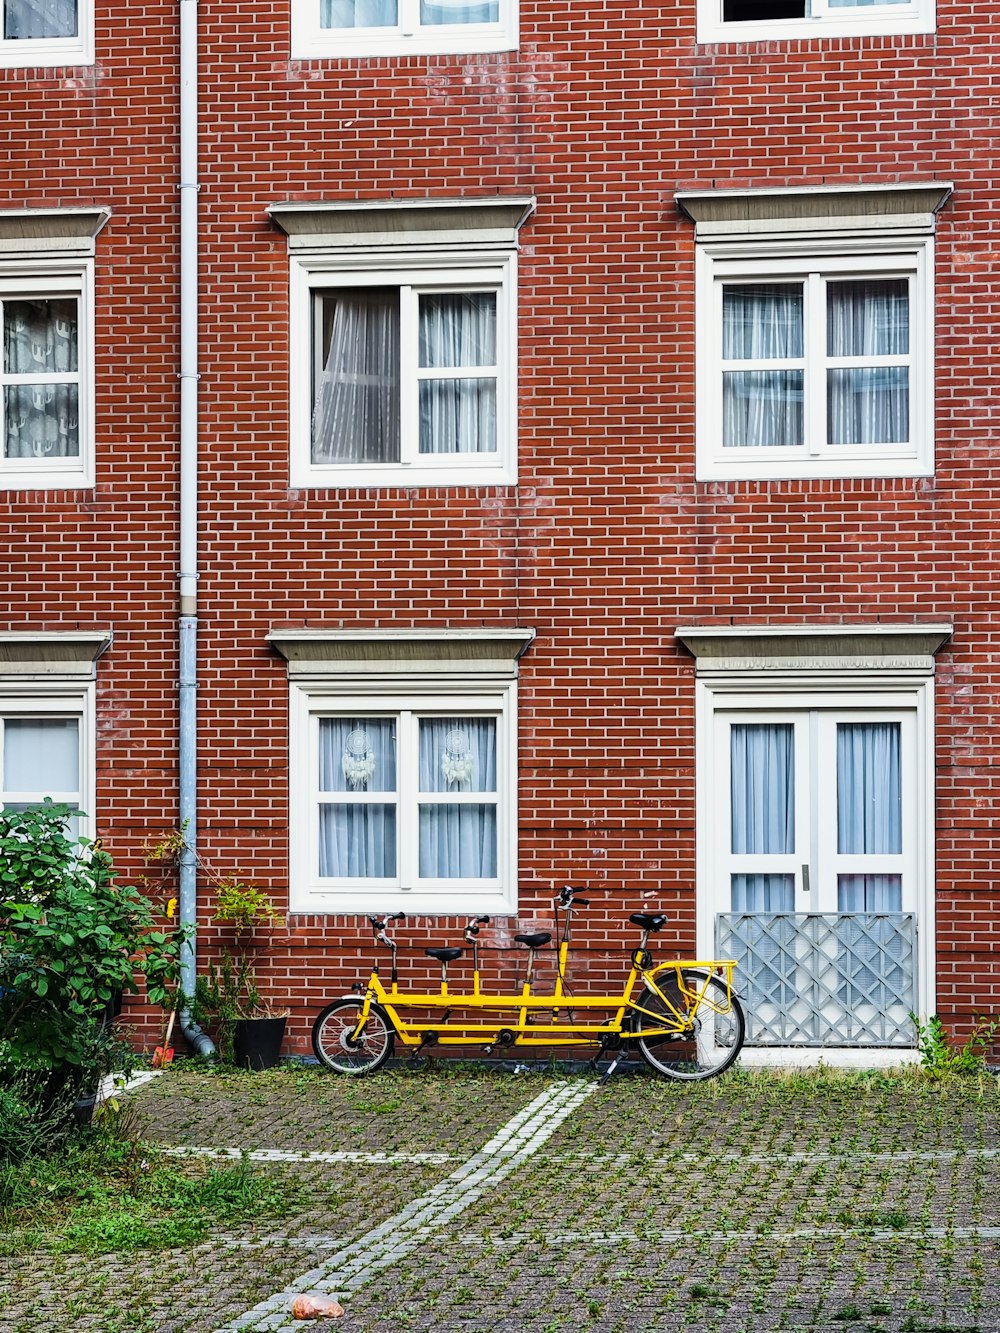 a yellow bike parked in front of a brick building